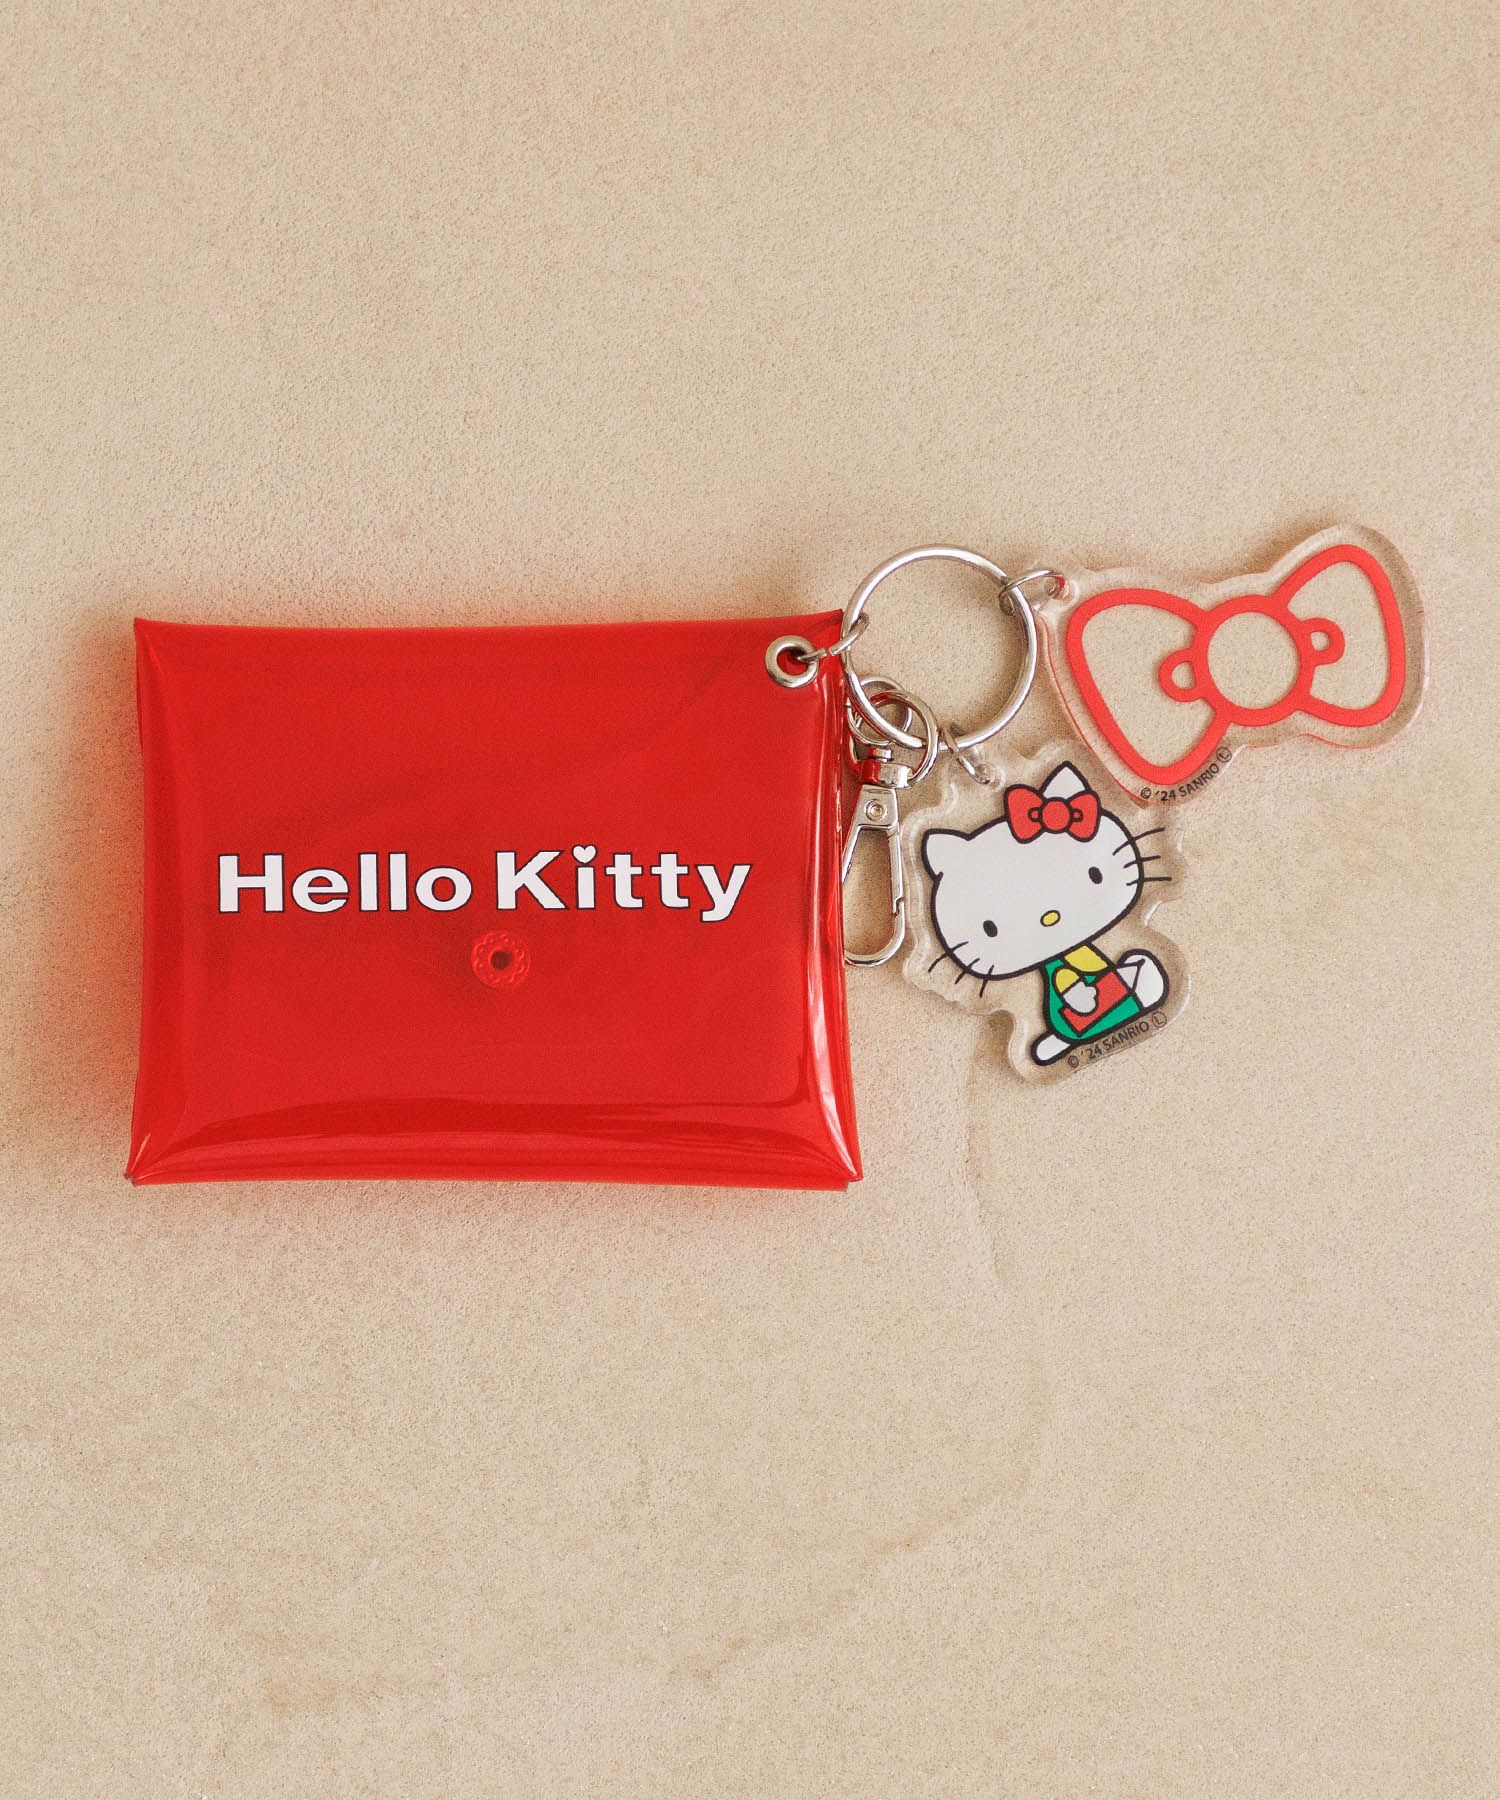 Me%【追加予約】【HELLO KITTY】クリアポーチチャーム | [公式